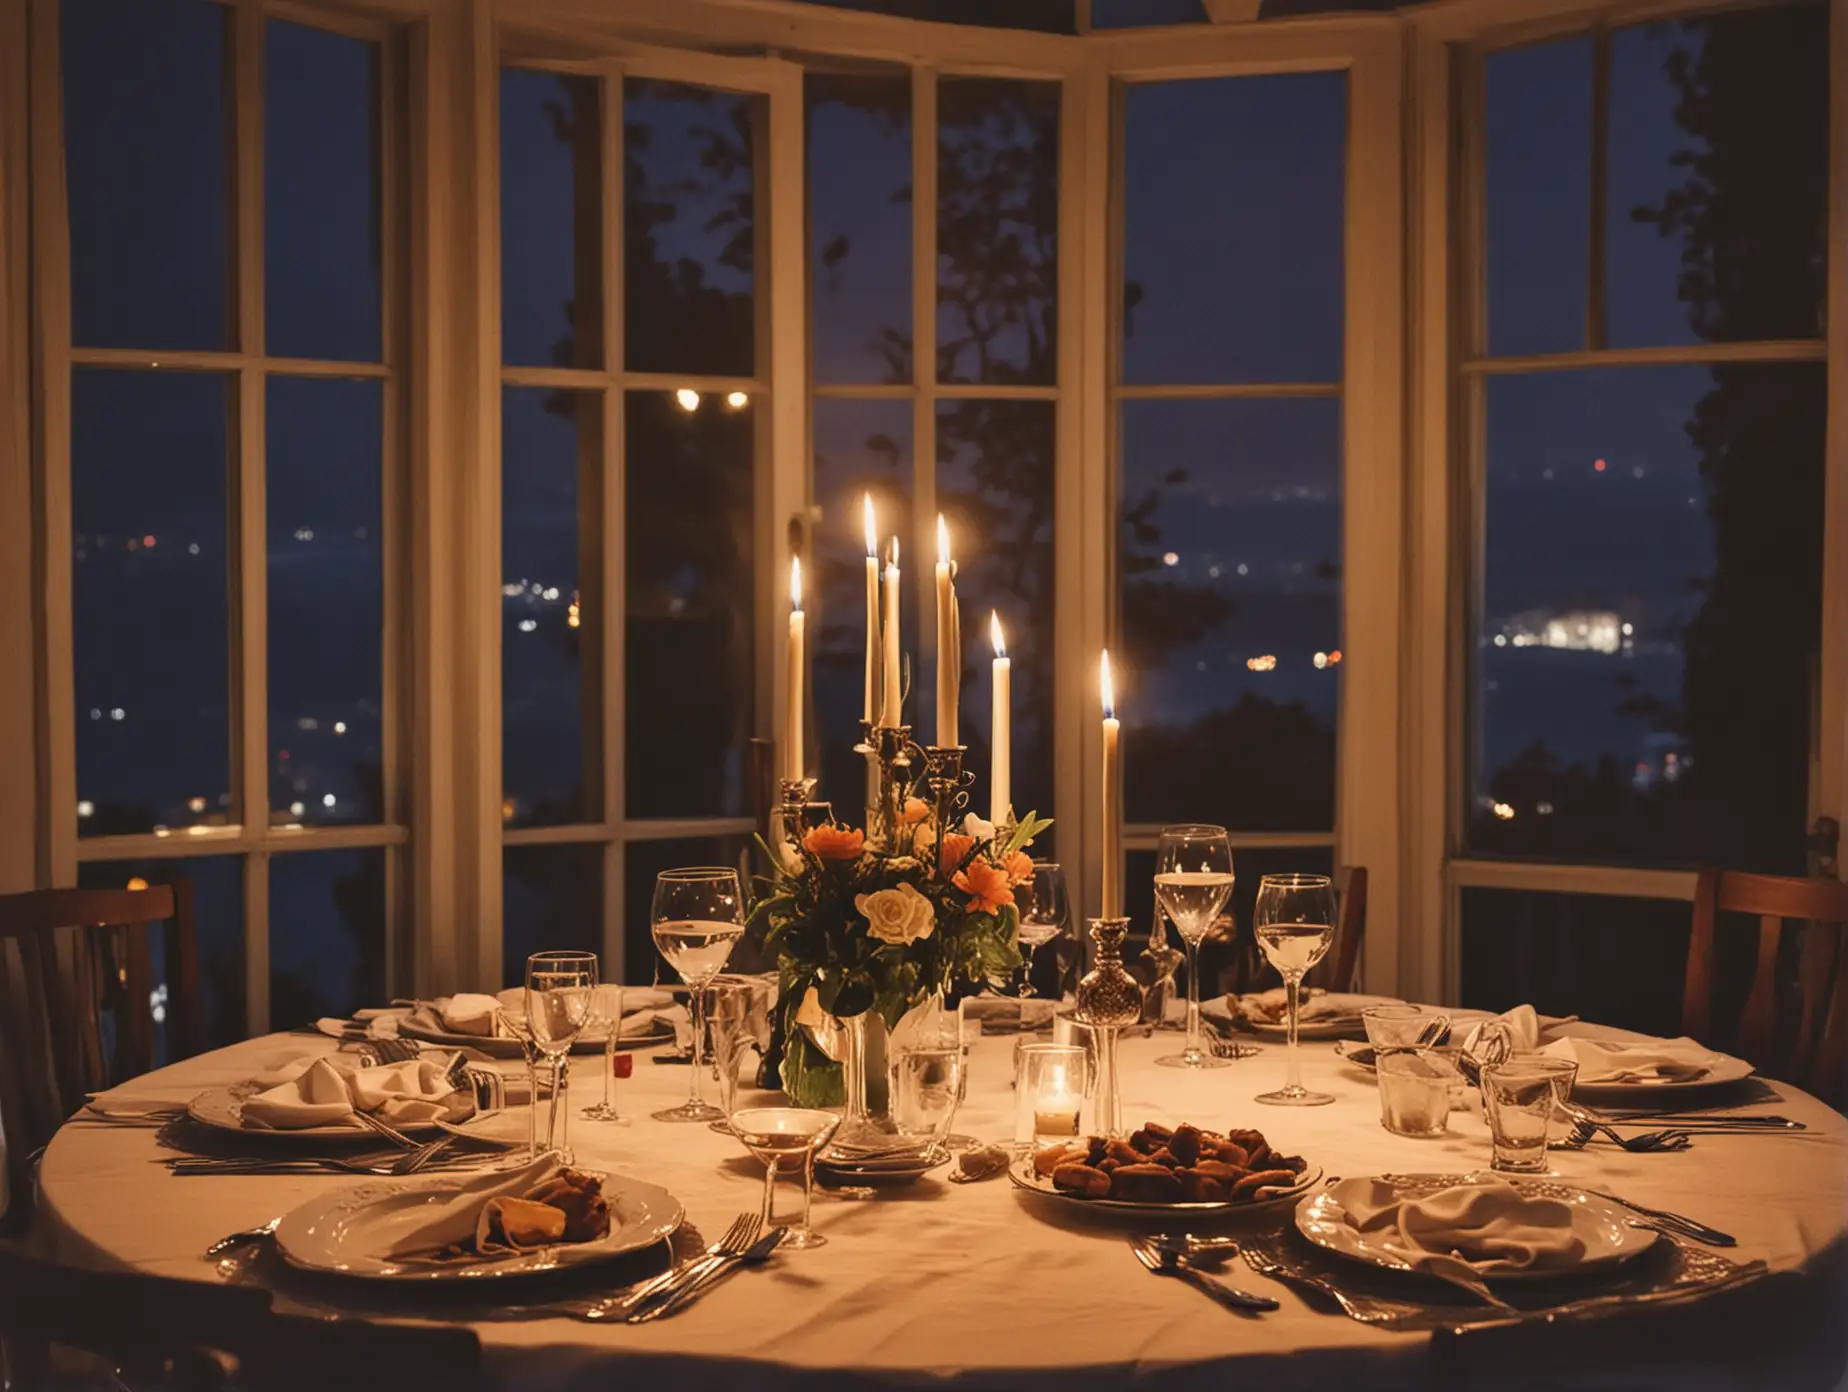 Romantic-Candlelit-Dinner-Date-in-a-Cozy-Setting